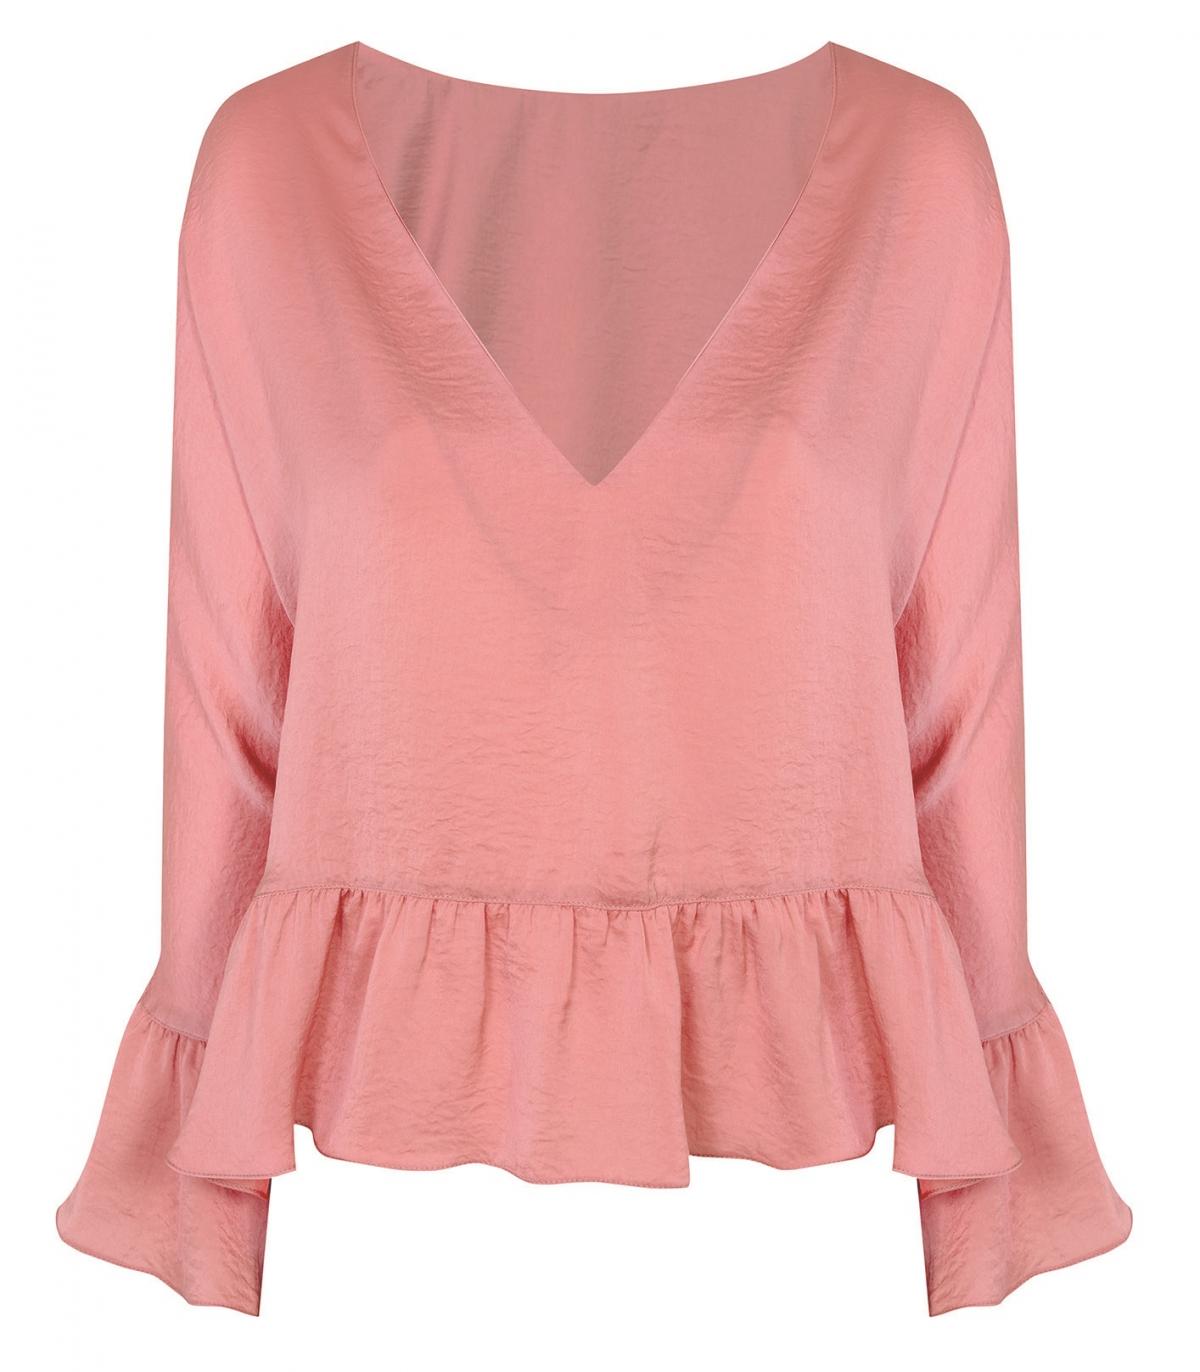 Topshop, Flared Top, £32